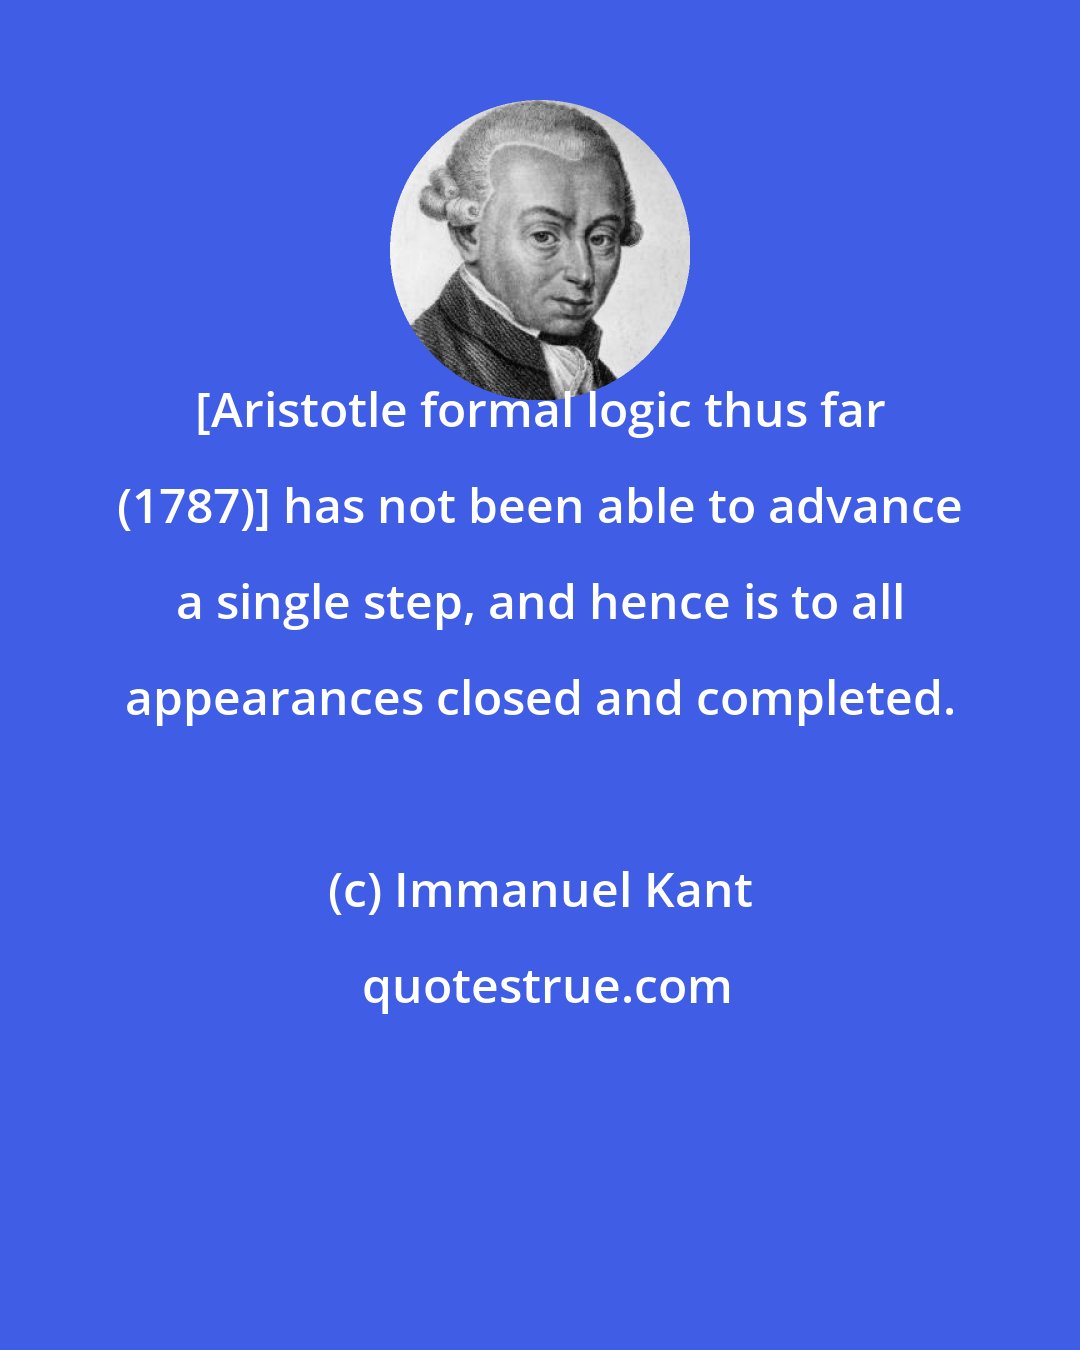 Immanuel Kant: [Aristotle formal logic thus far (1787)] has not been able to advance a single step, and hence is to all appearances closed and completed.